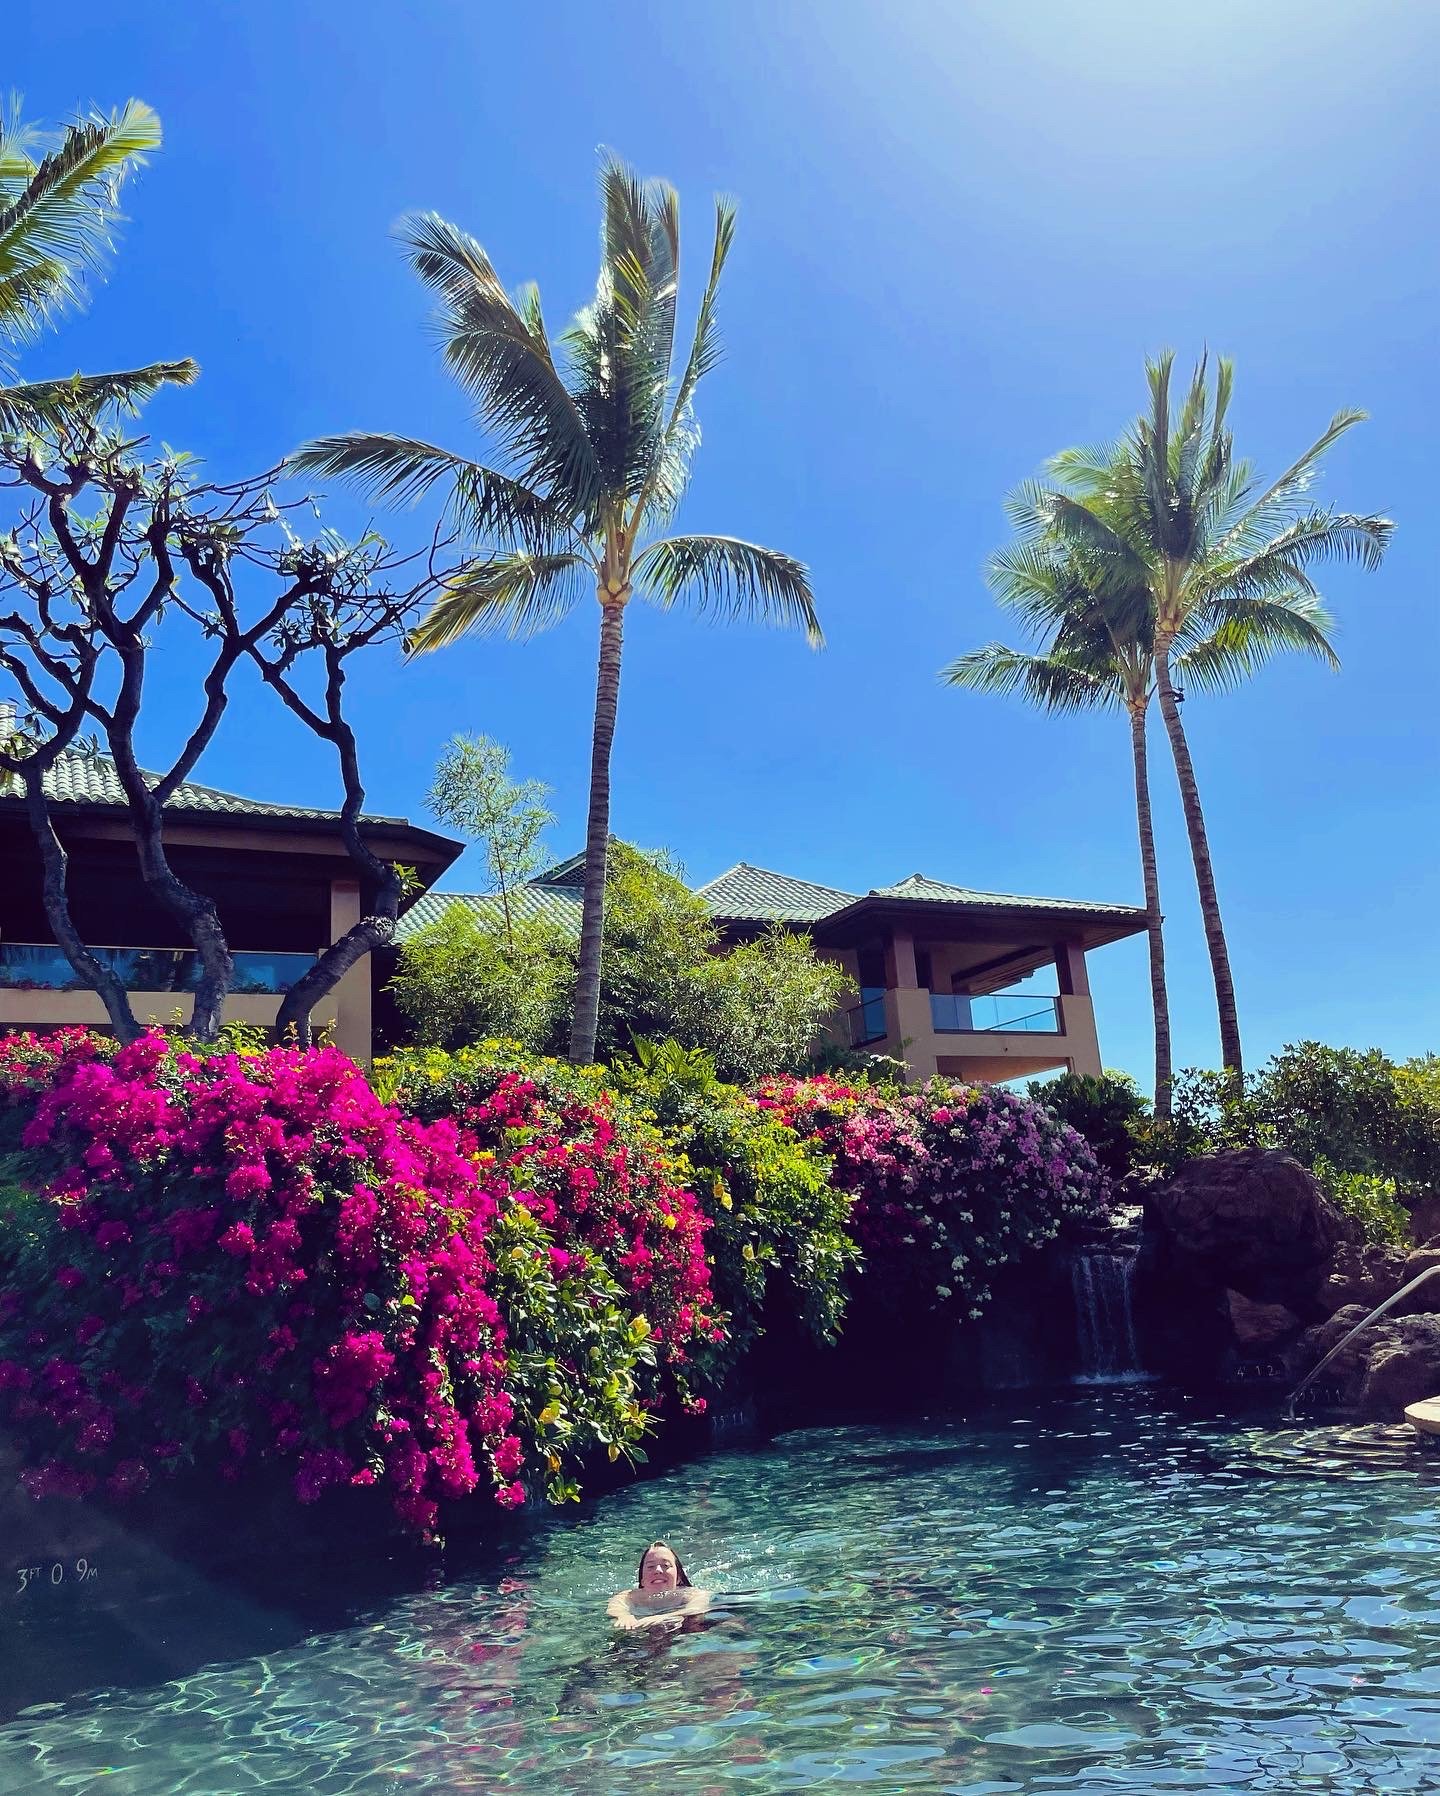 Poolside is the place to be at the Four Seasons Lanai.jpg